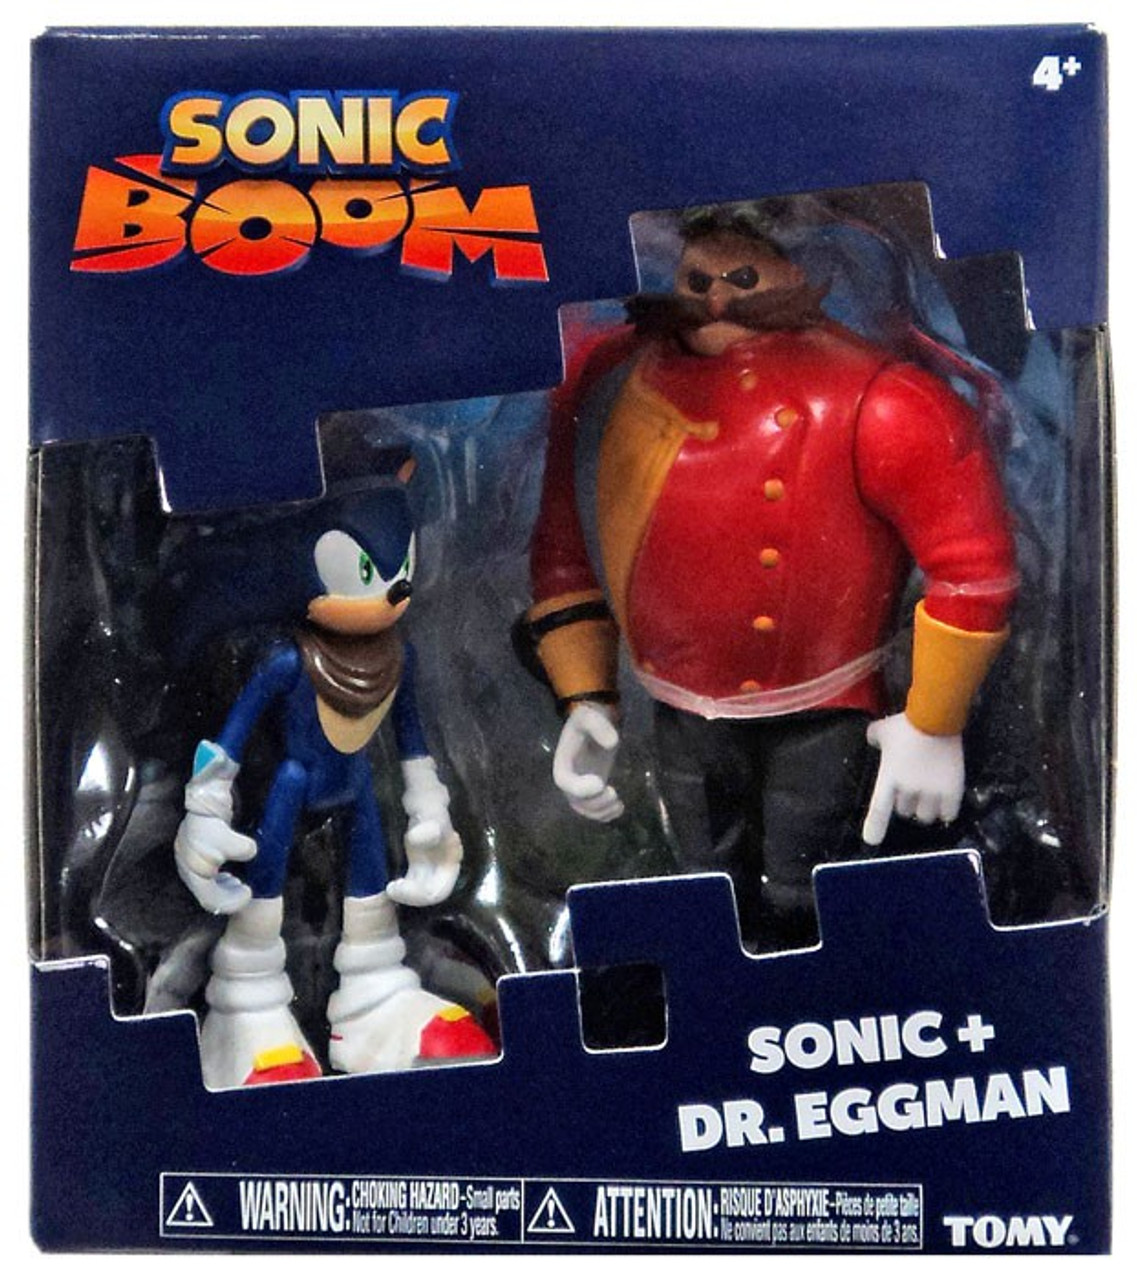 Sonic The Hedgehog Sonic Boom Dr. Eggman Sonic 3 Action Figure 2-Pack TOMY - ToyWiz1137 x 1280